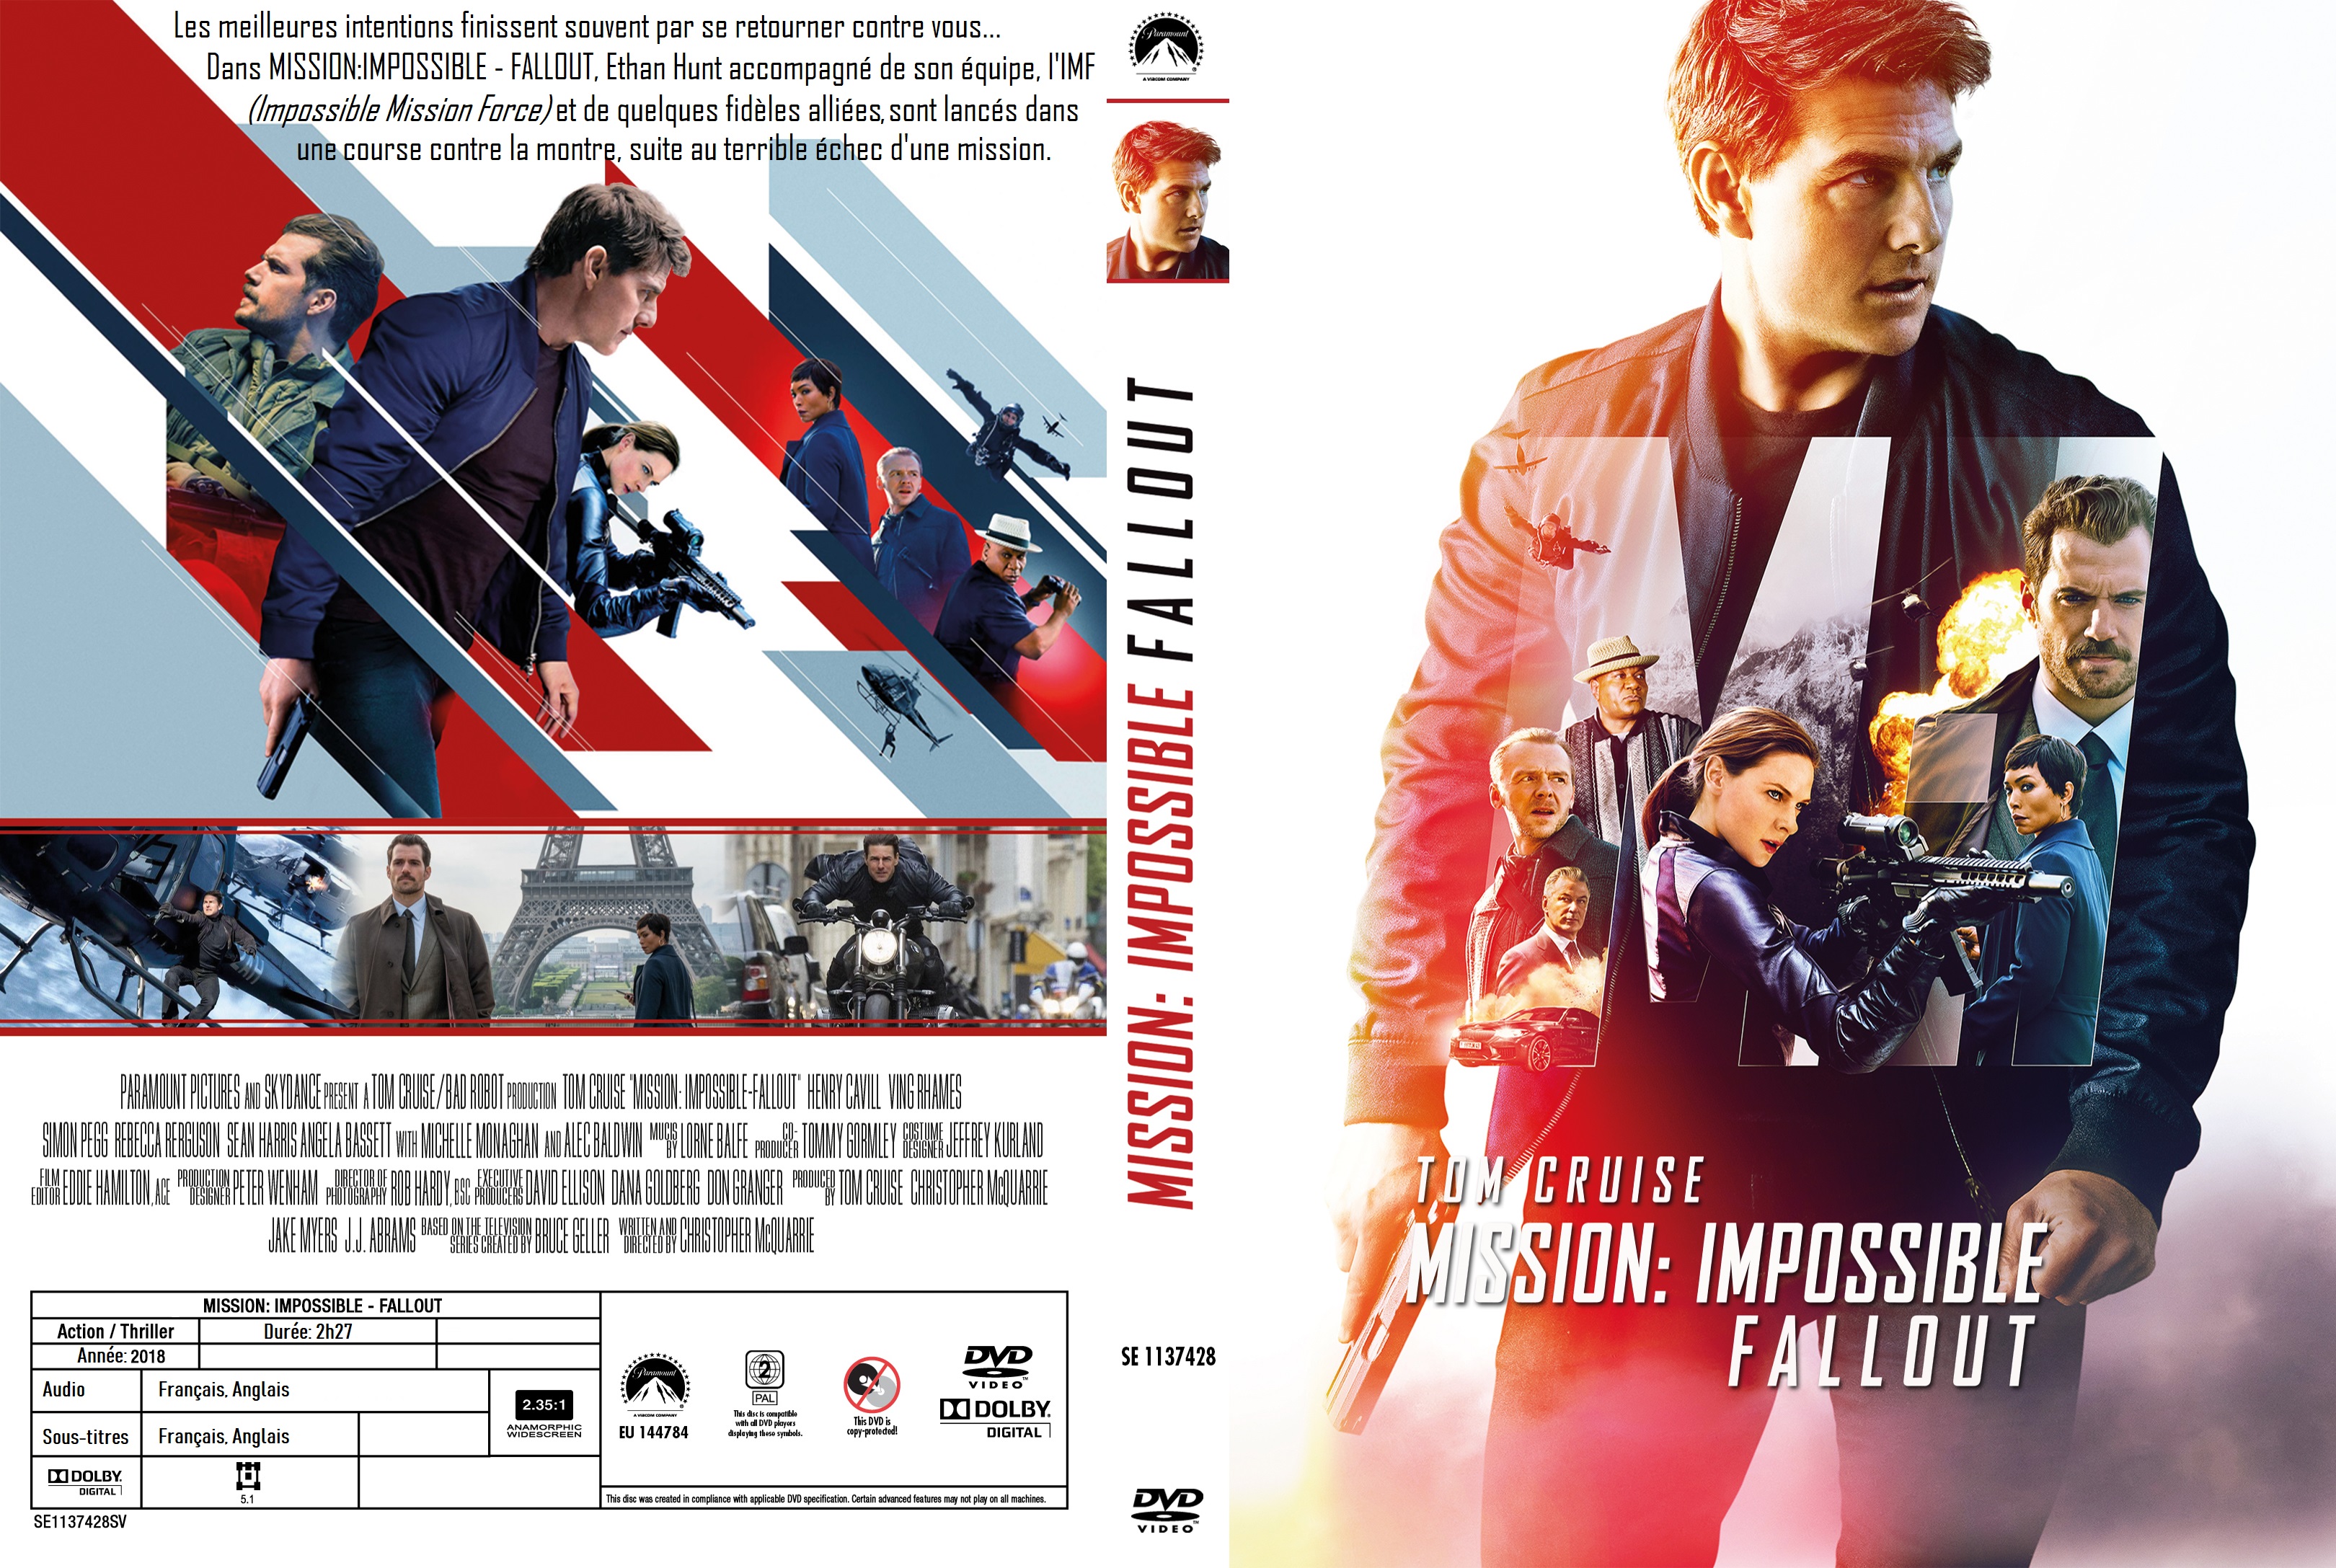 Jaquette DVD Mission Impossible Fallout custom